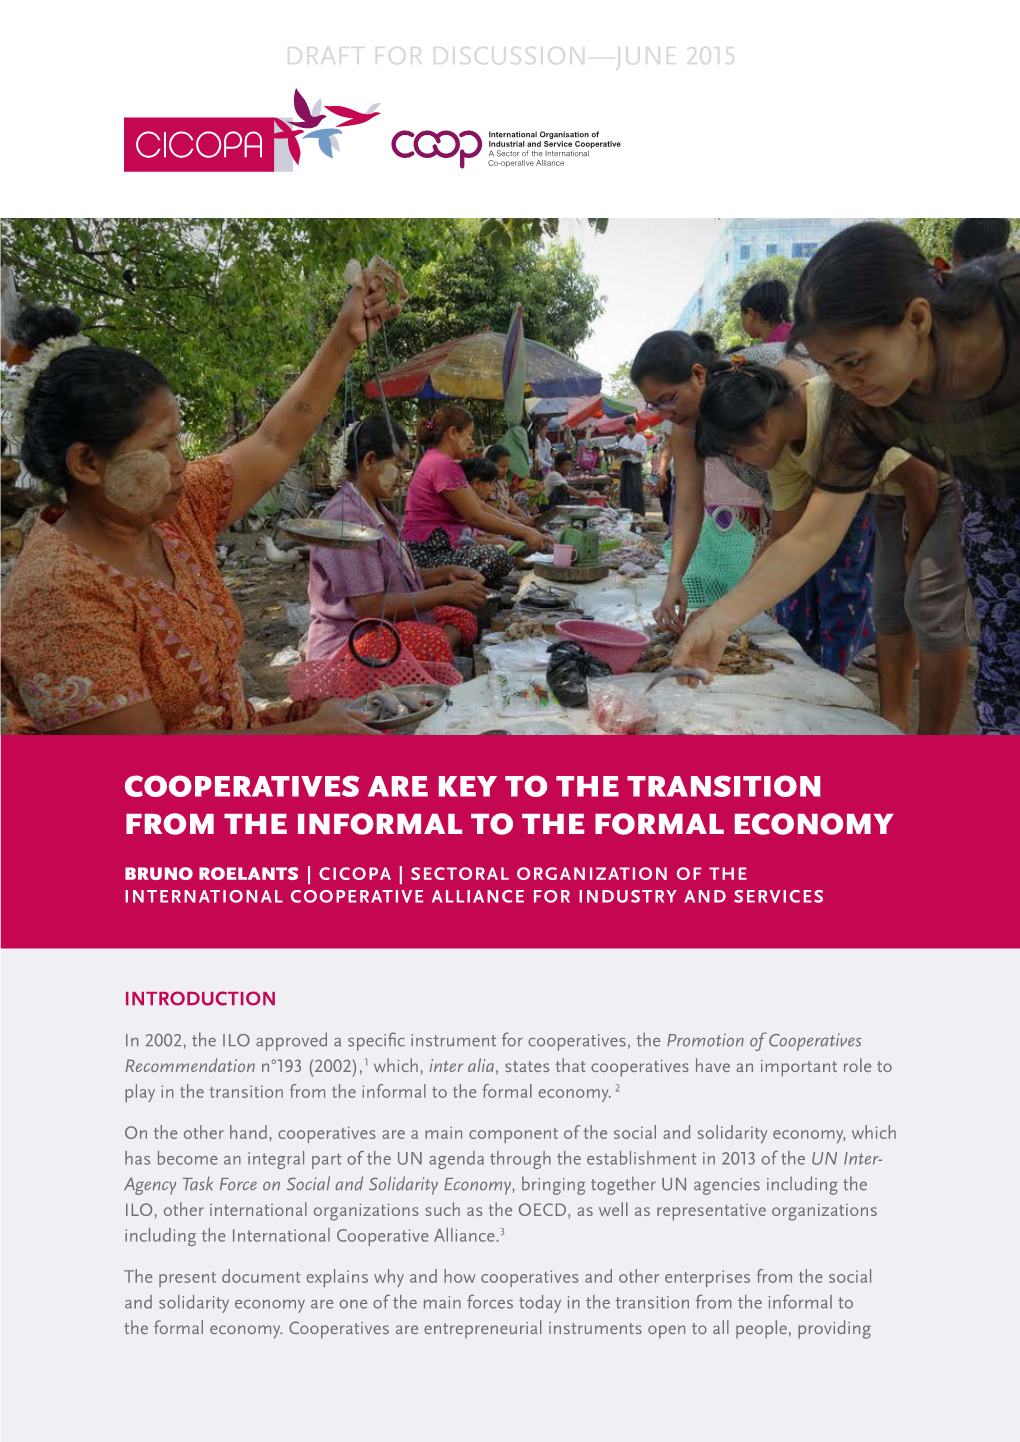 Cooperatives Are Key to the Transition from the Informal to the Formal Economy